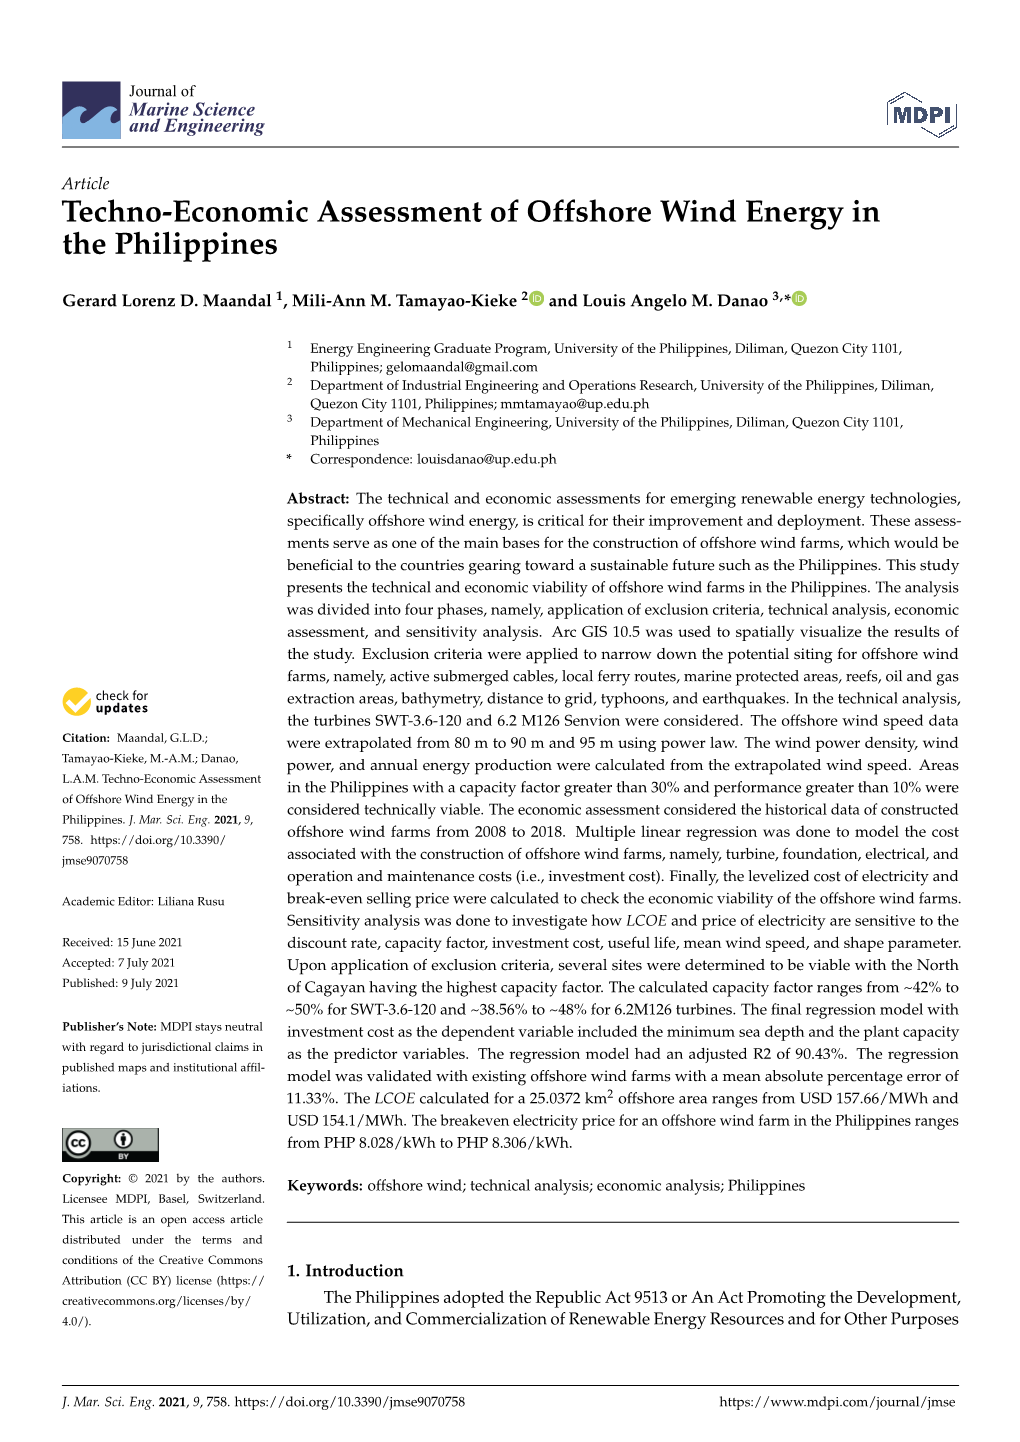 Techno-Economic Assessment of Offshore Wind Energy in the Philippines